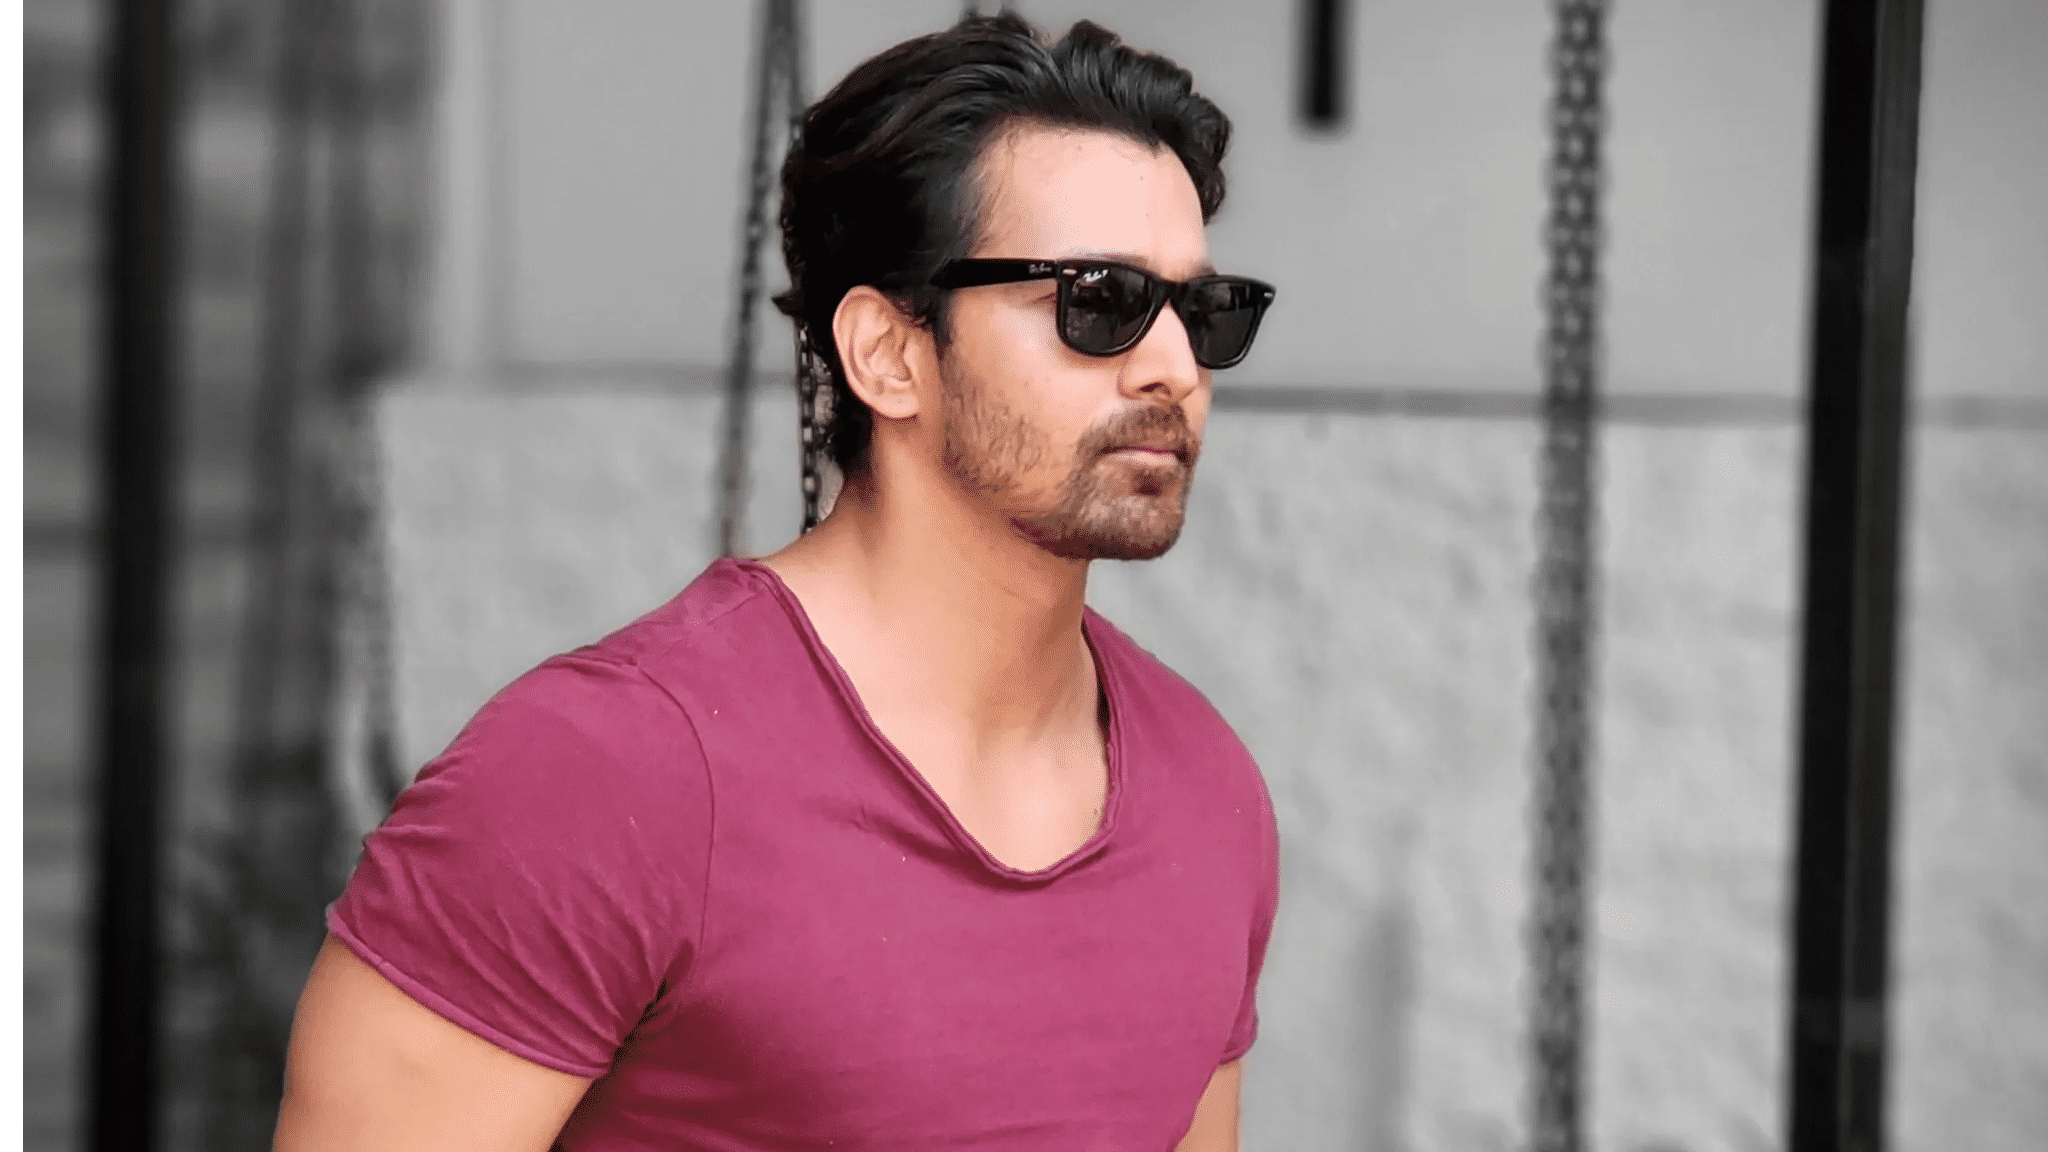 Harshvardhan Rane to sell his motorbike to collect funds for oxygen concentrators